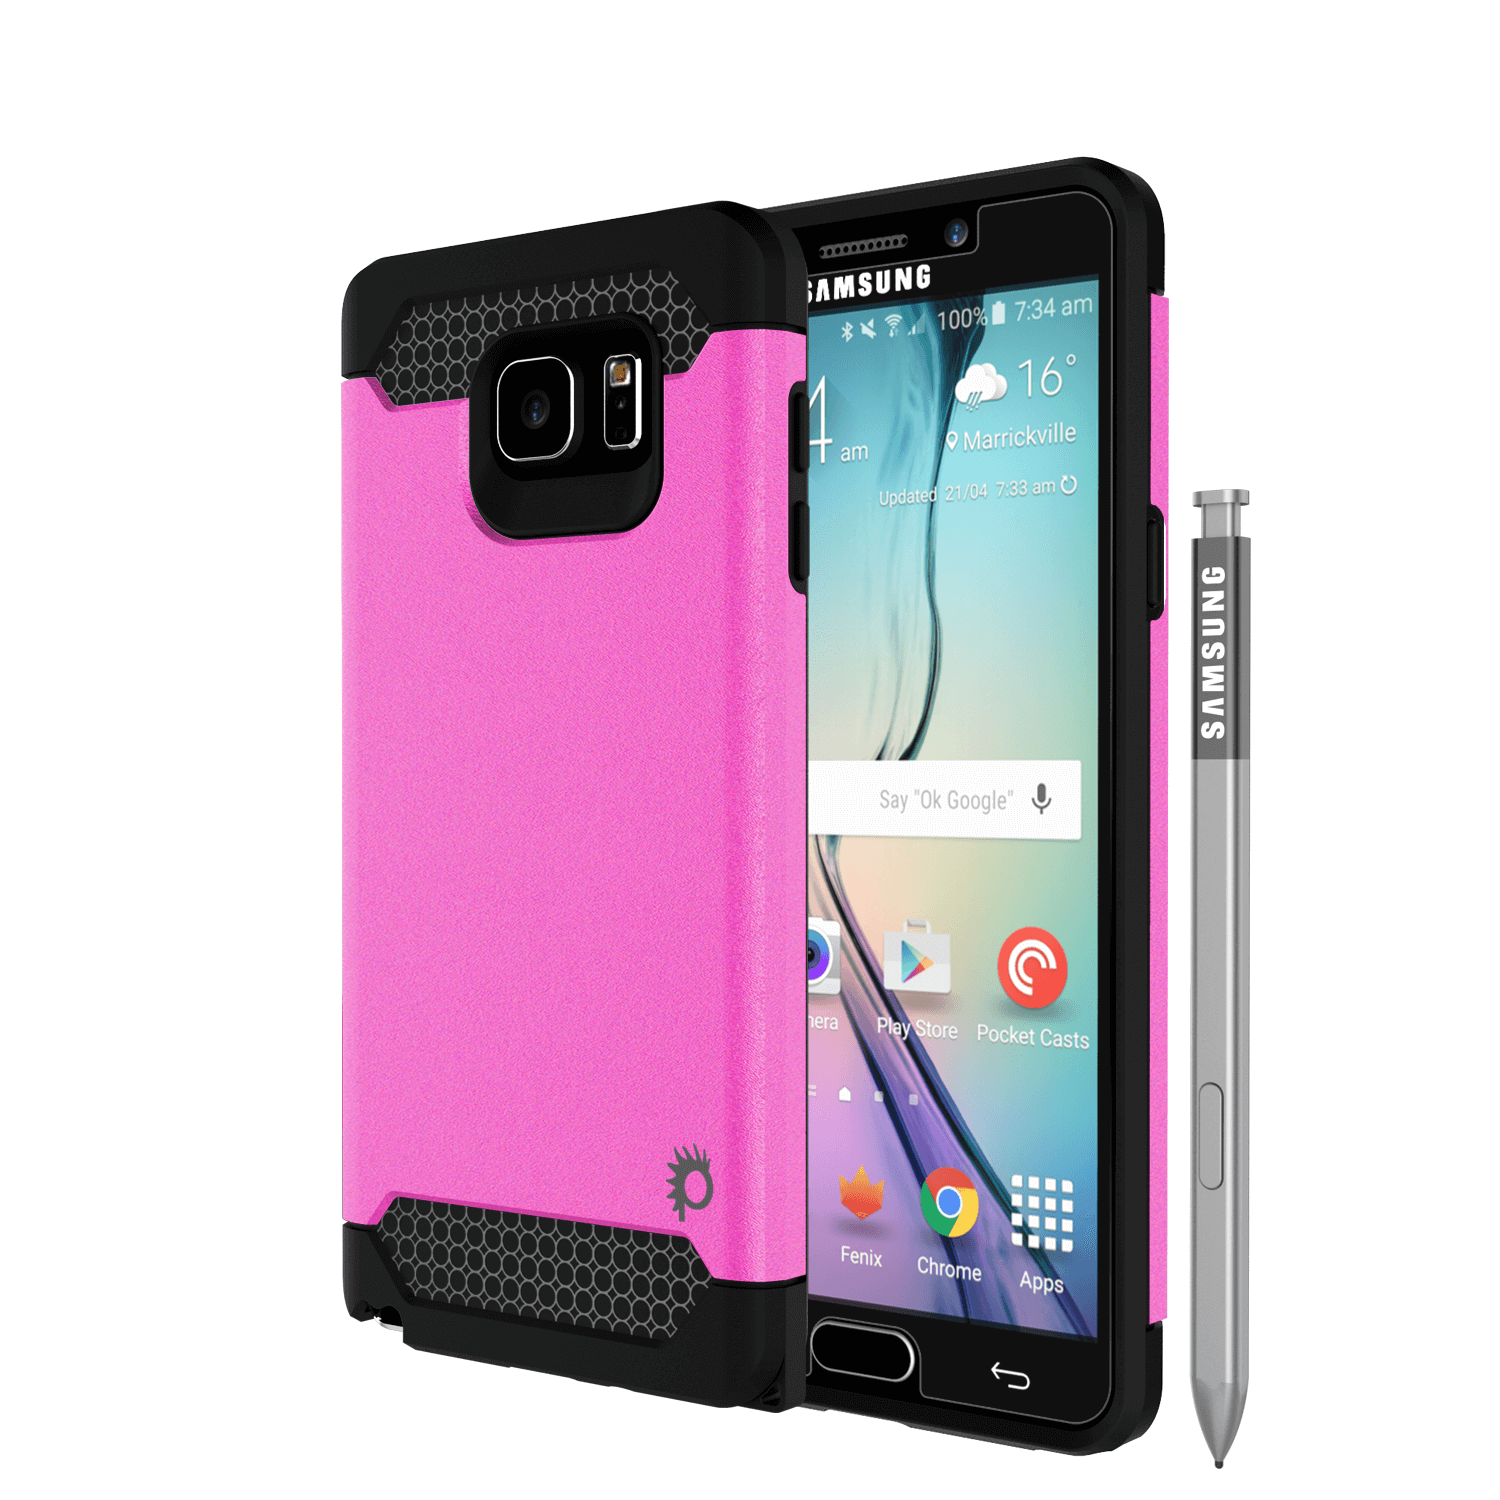 Galaxy Note 5Case PunkCase Galactic Pink Series Slim Protective Armor Soft Cover Case w/ Tempered Glass Protector Lifetime Warranty